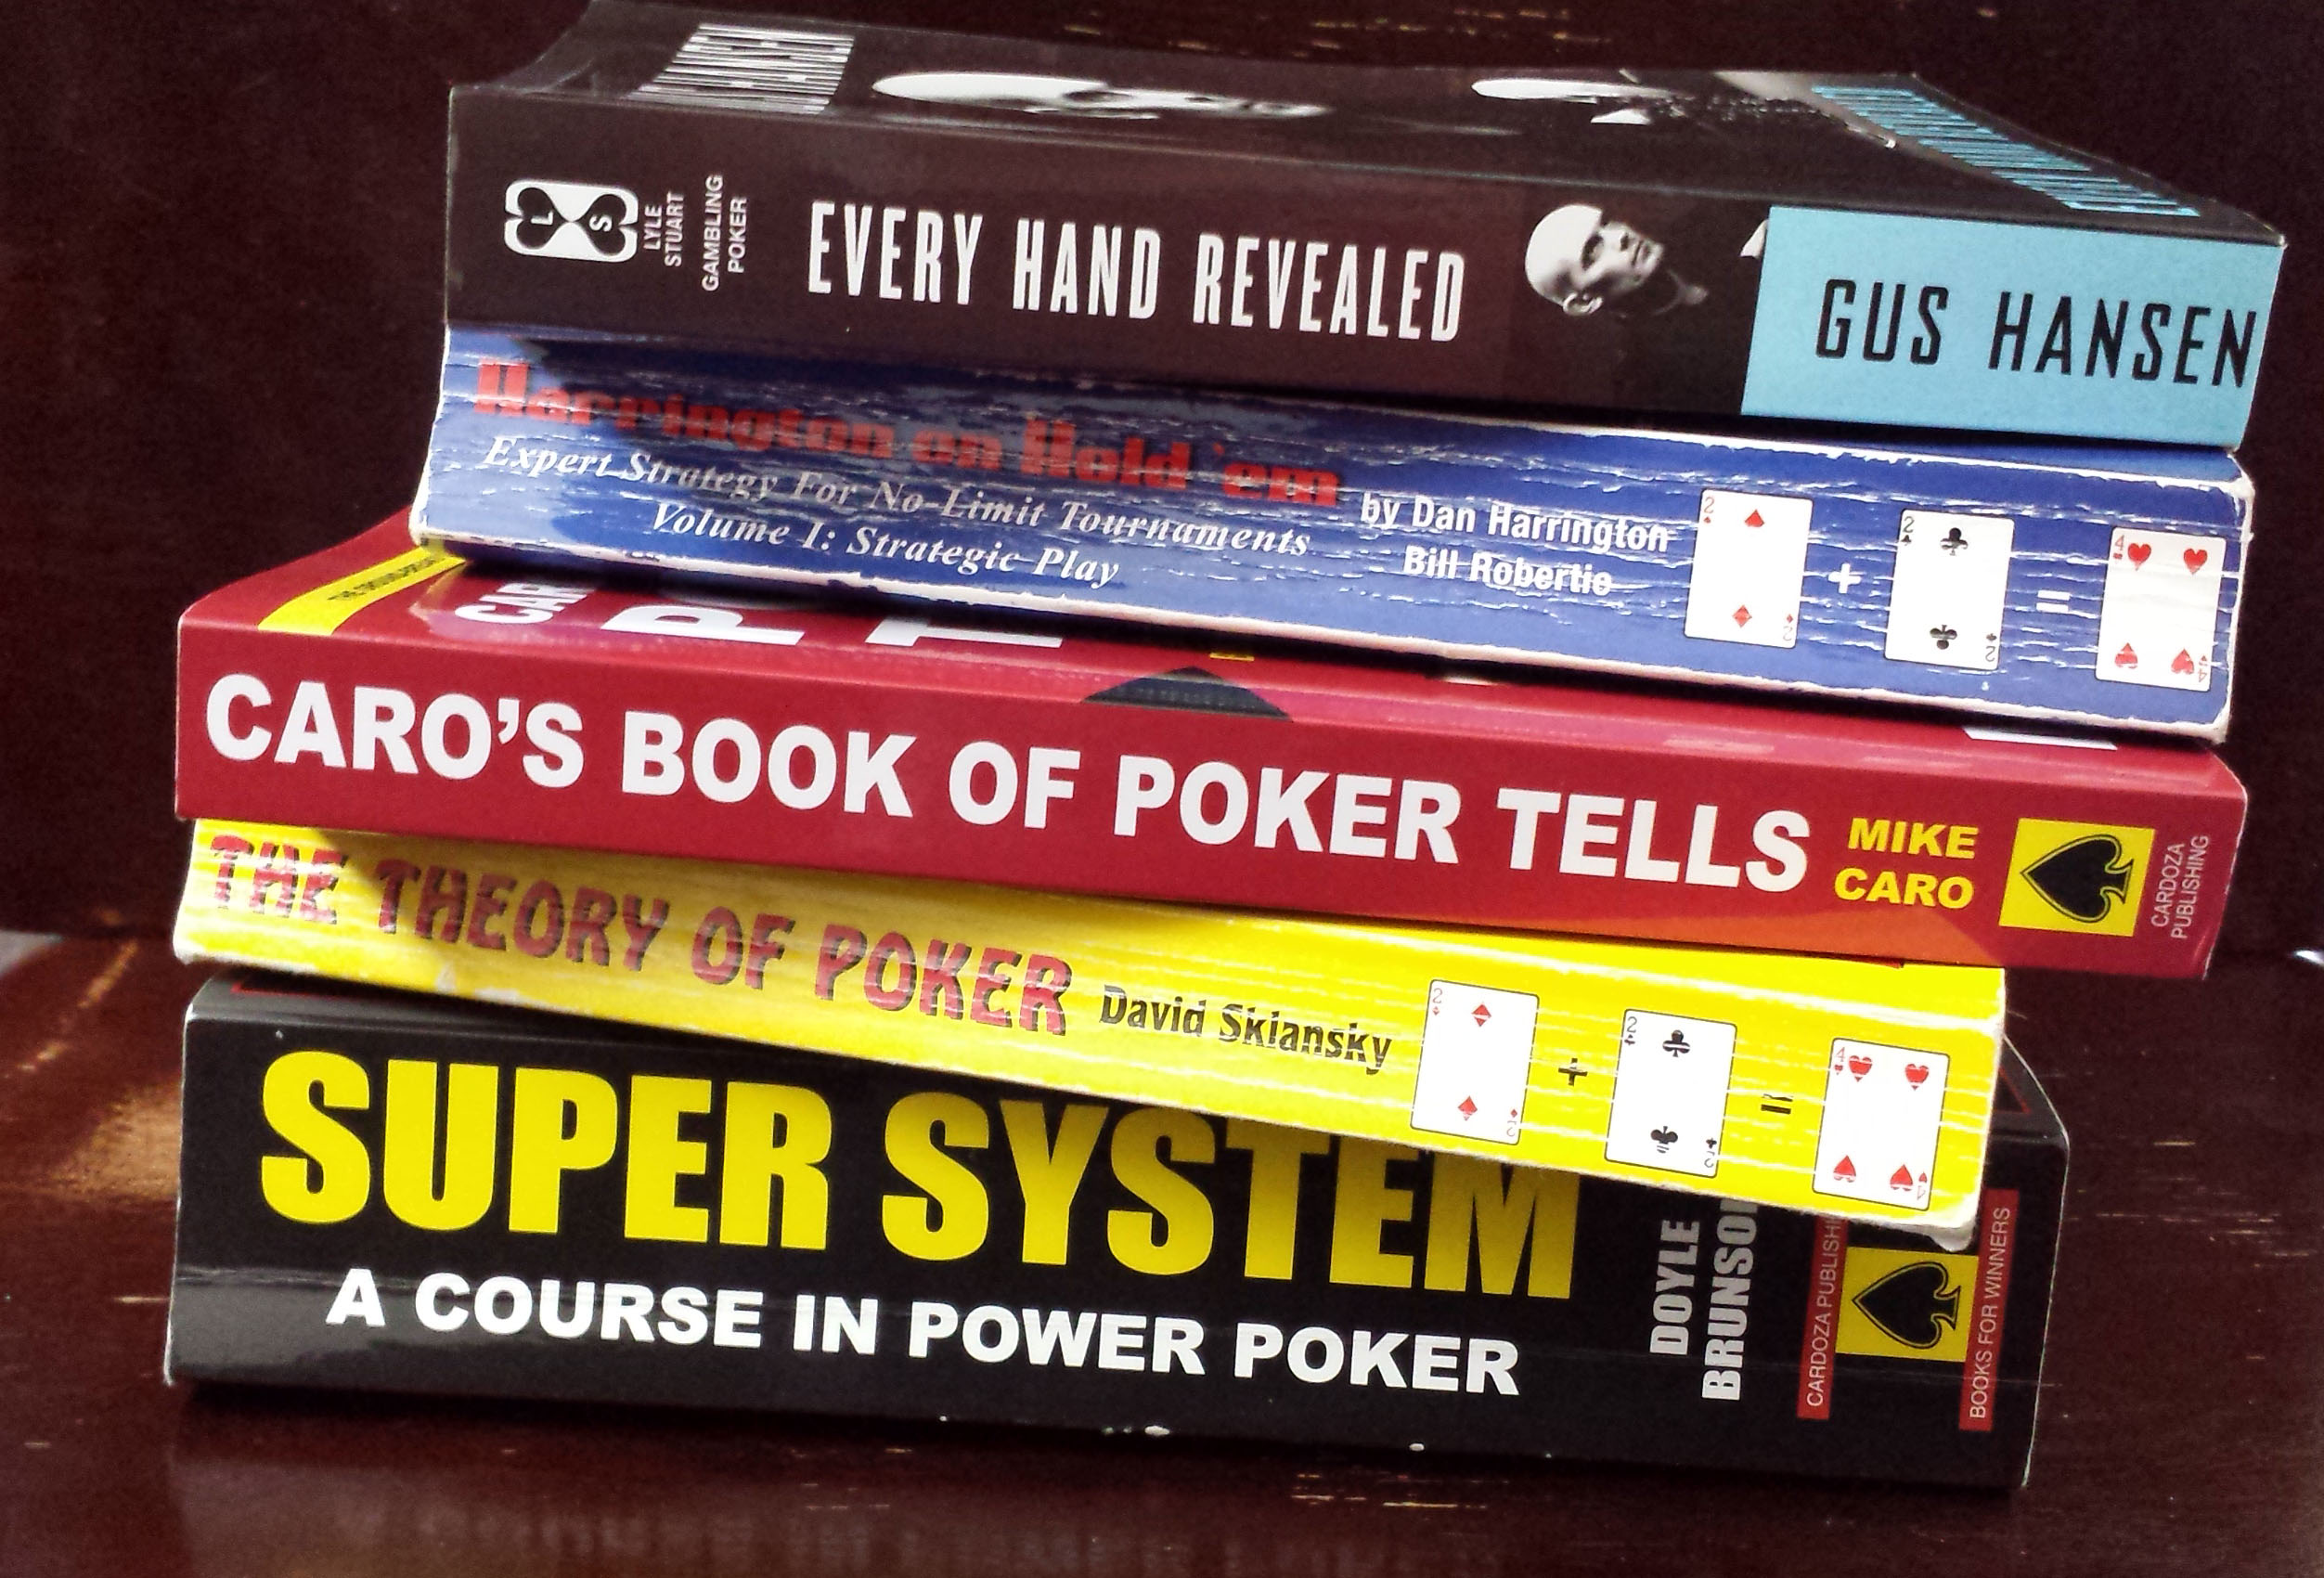 World Top 16 Poker Books 2021: Best Books For Build Winning Strategy, Continuous Learning And Improvement Of Your Poker Game